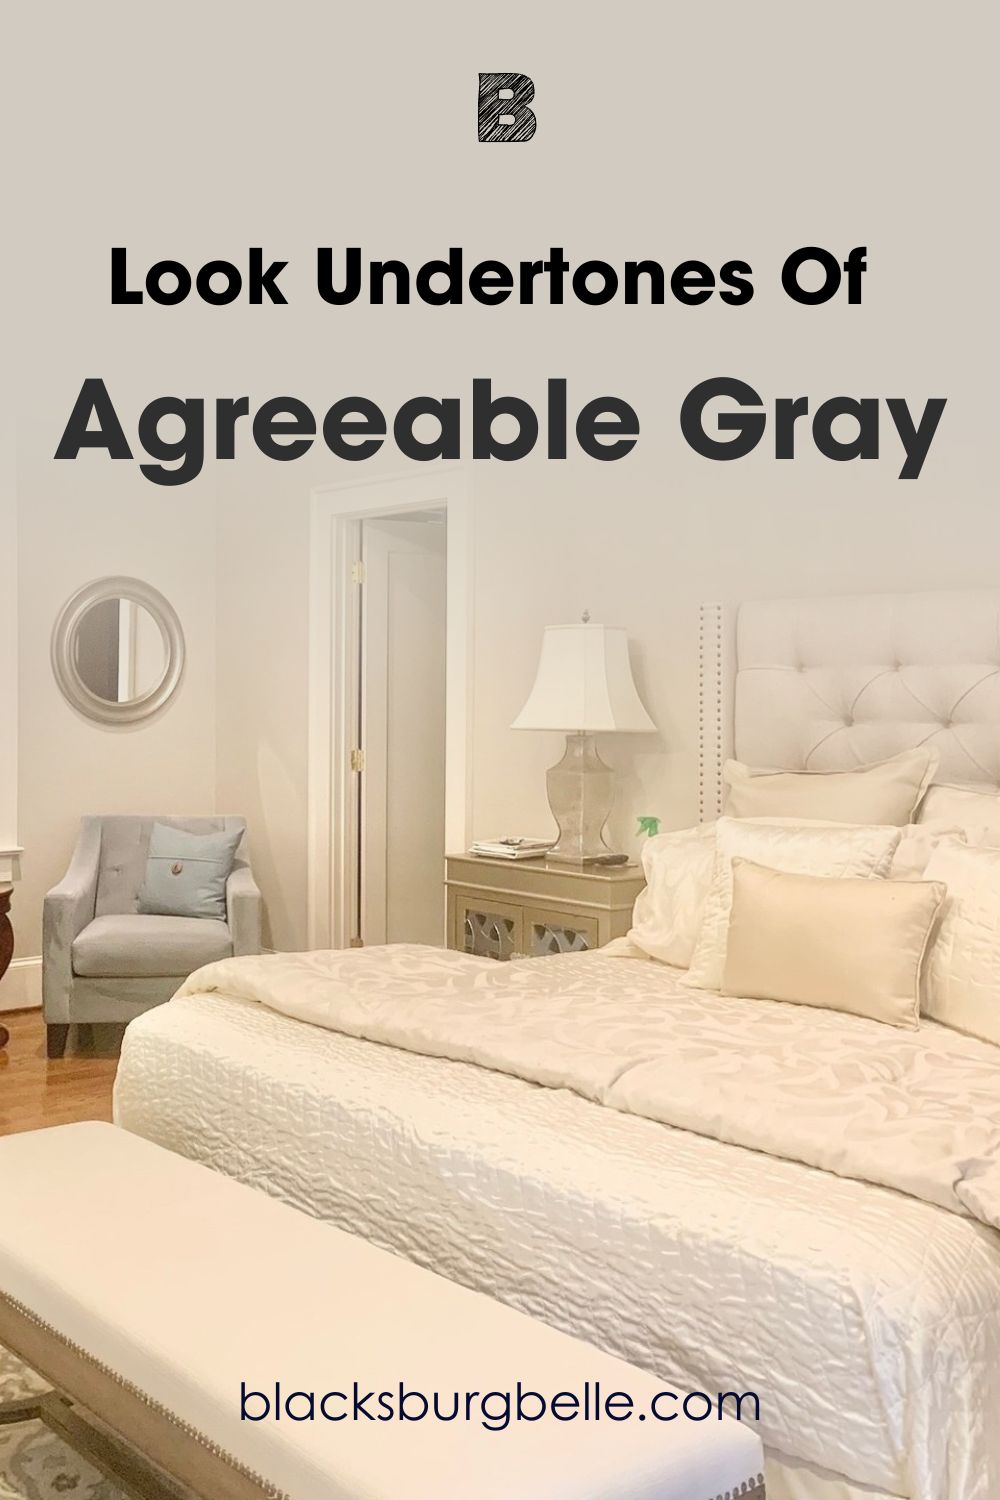 A Closer Look at Agreeable Gray’s Undertones